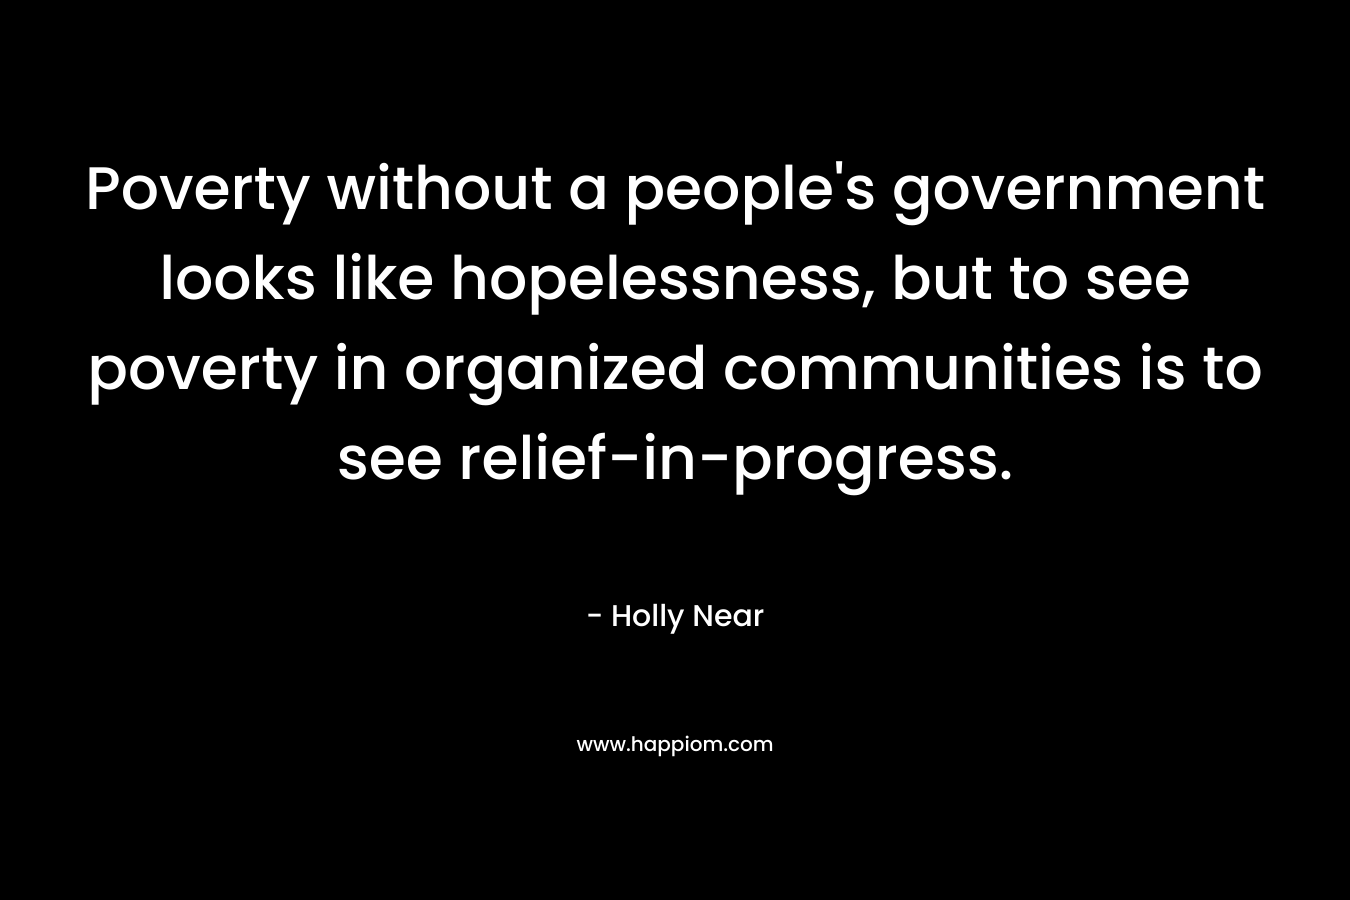 Poverty without a people's government looks like hopelessness, but to see poverty in organized communities is to see relief-in-progress.